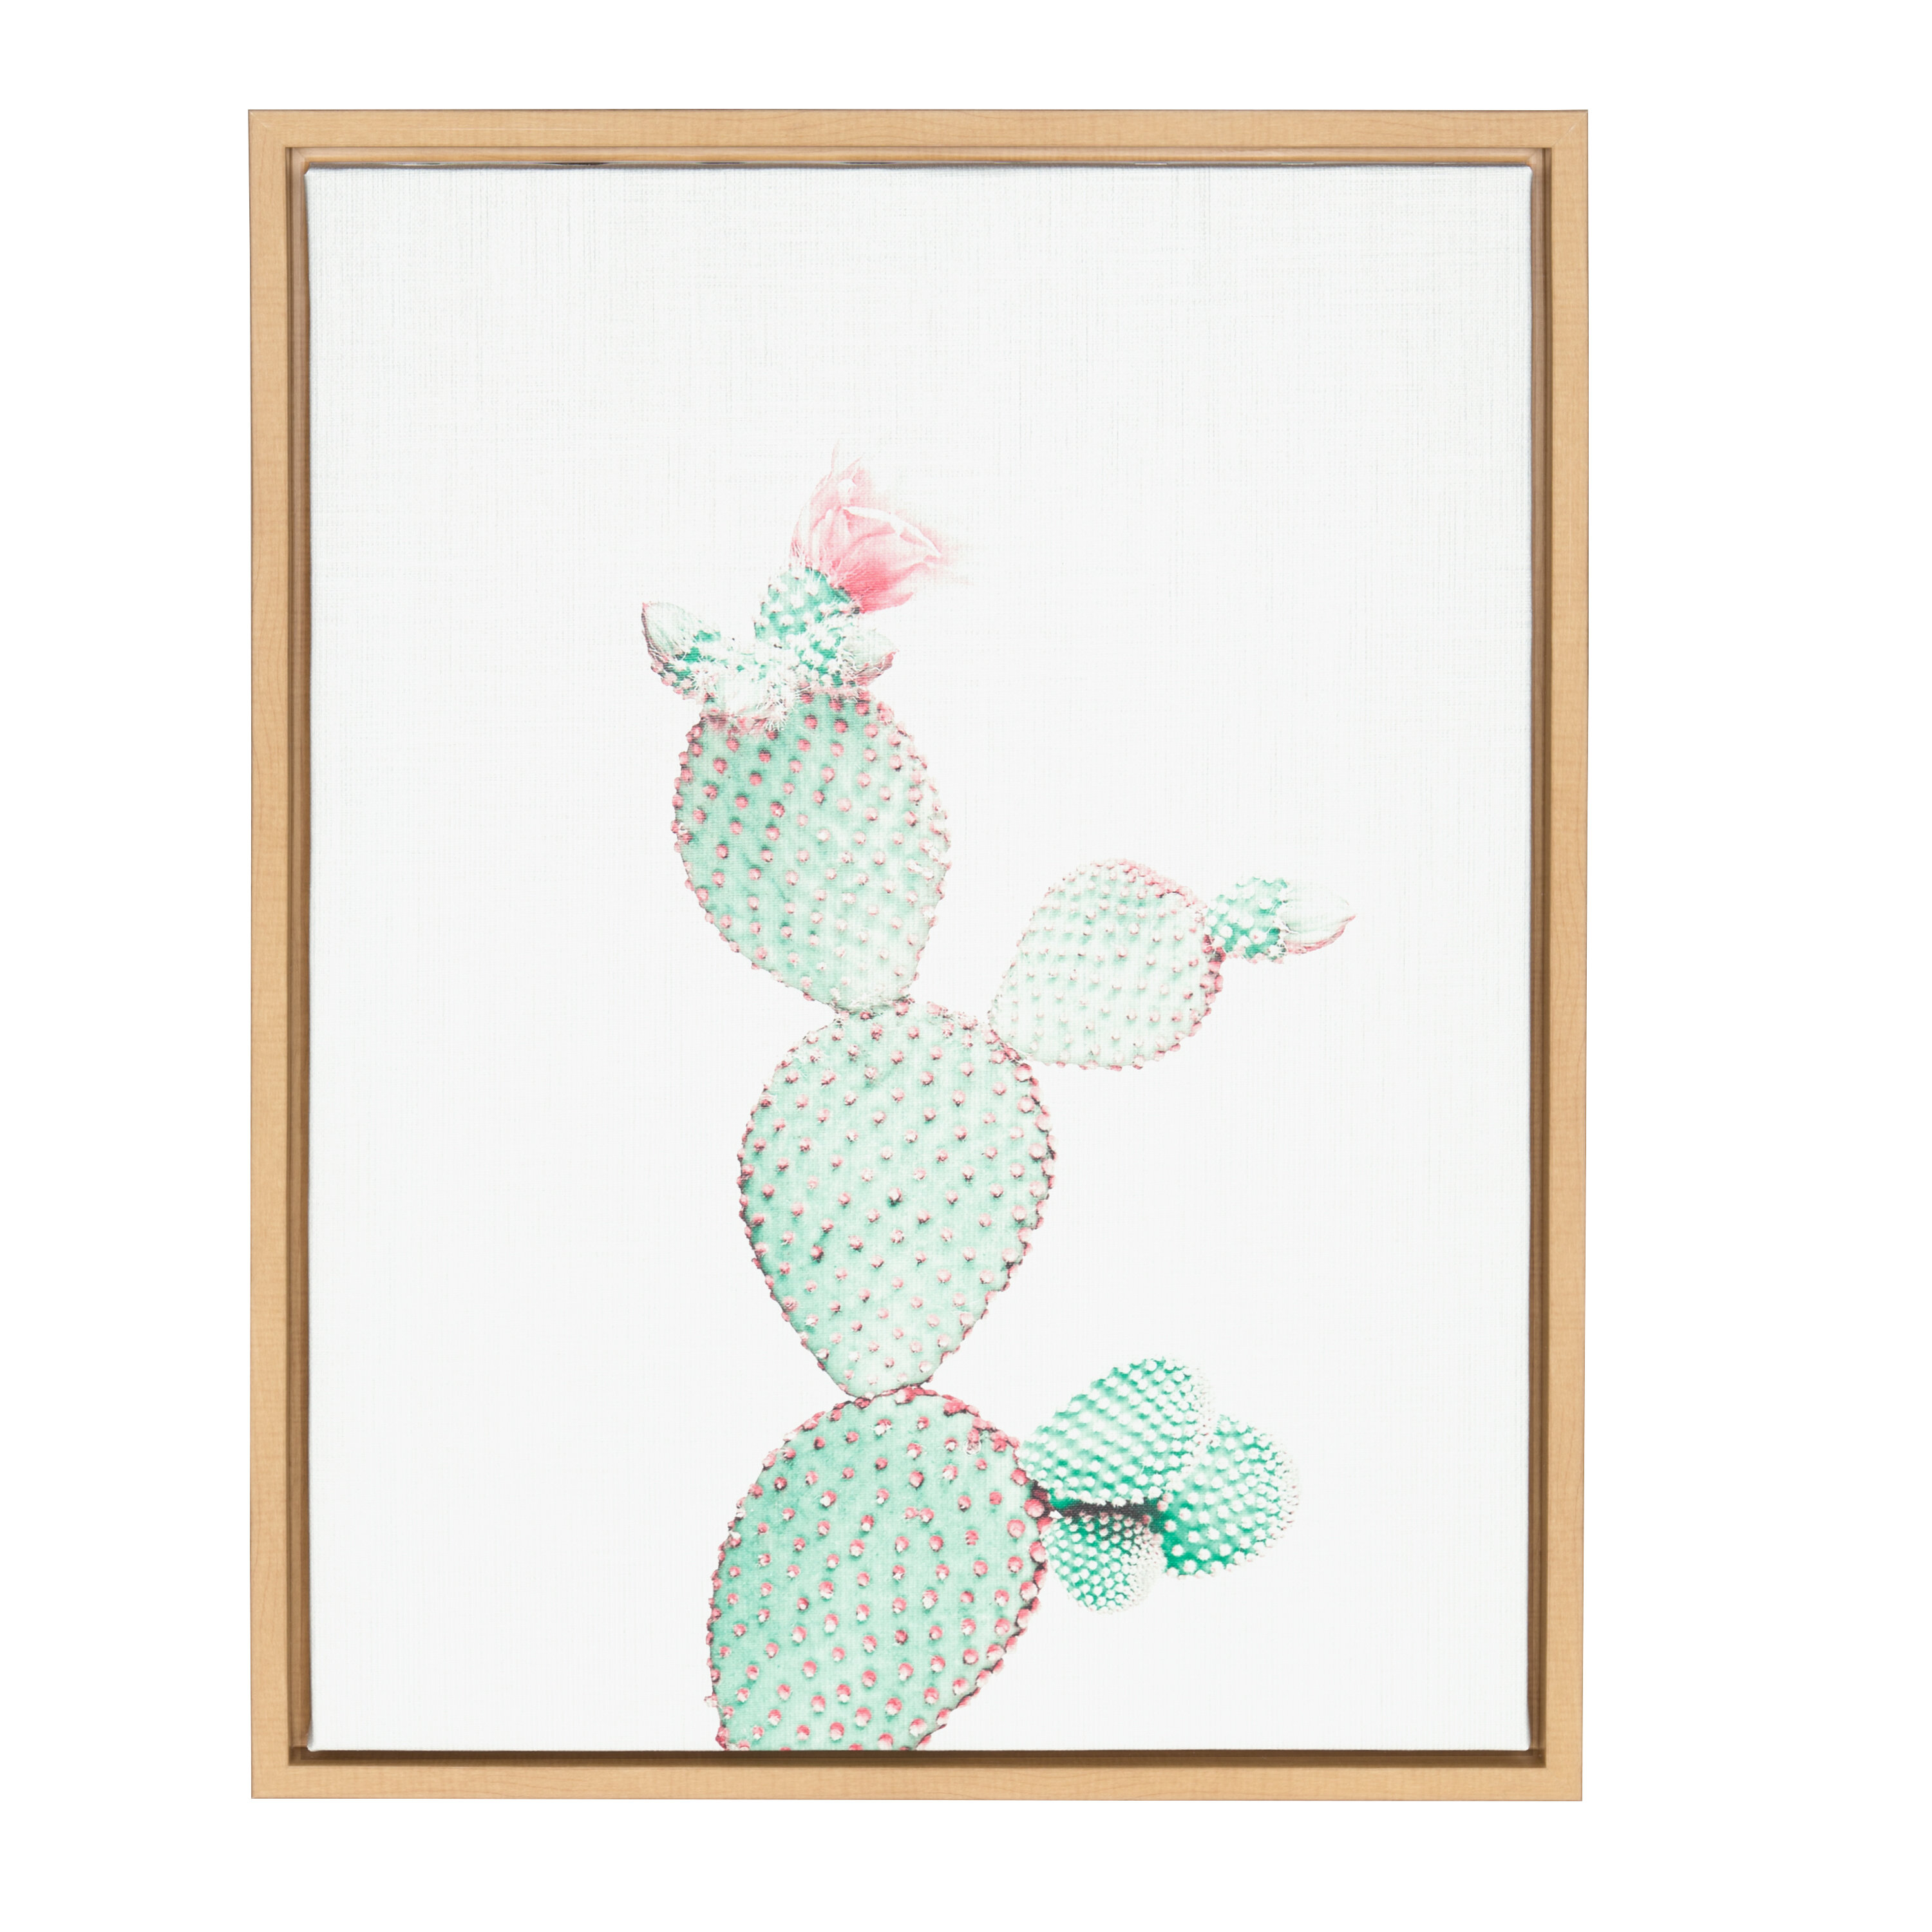 pastel green prickly pear cactus fine art image for wall gallery decor